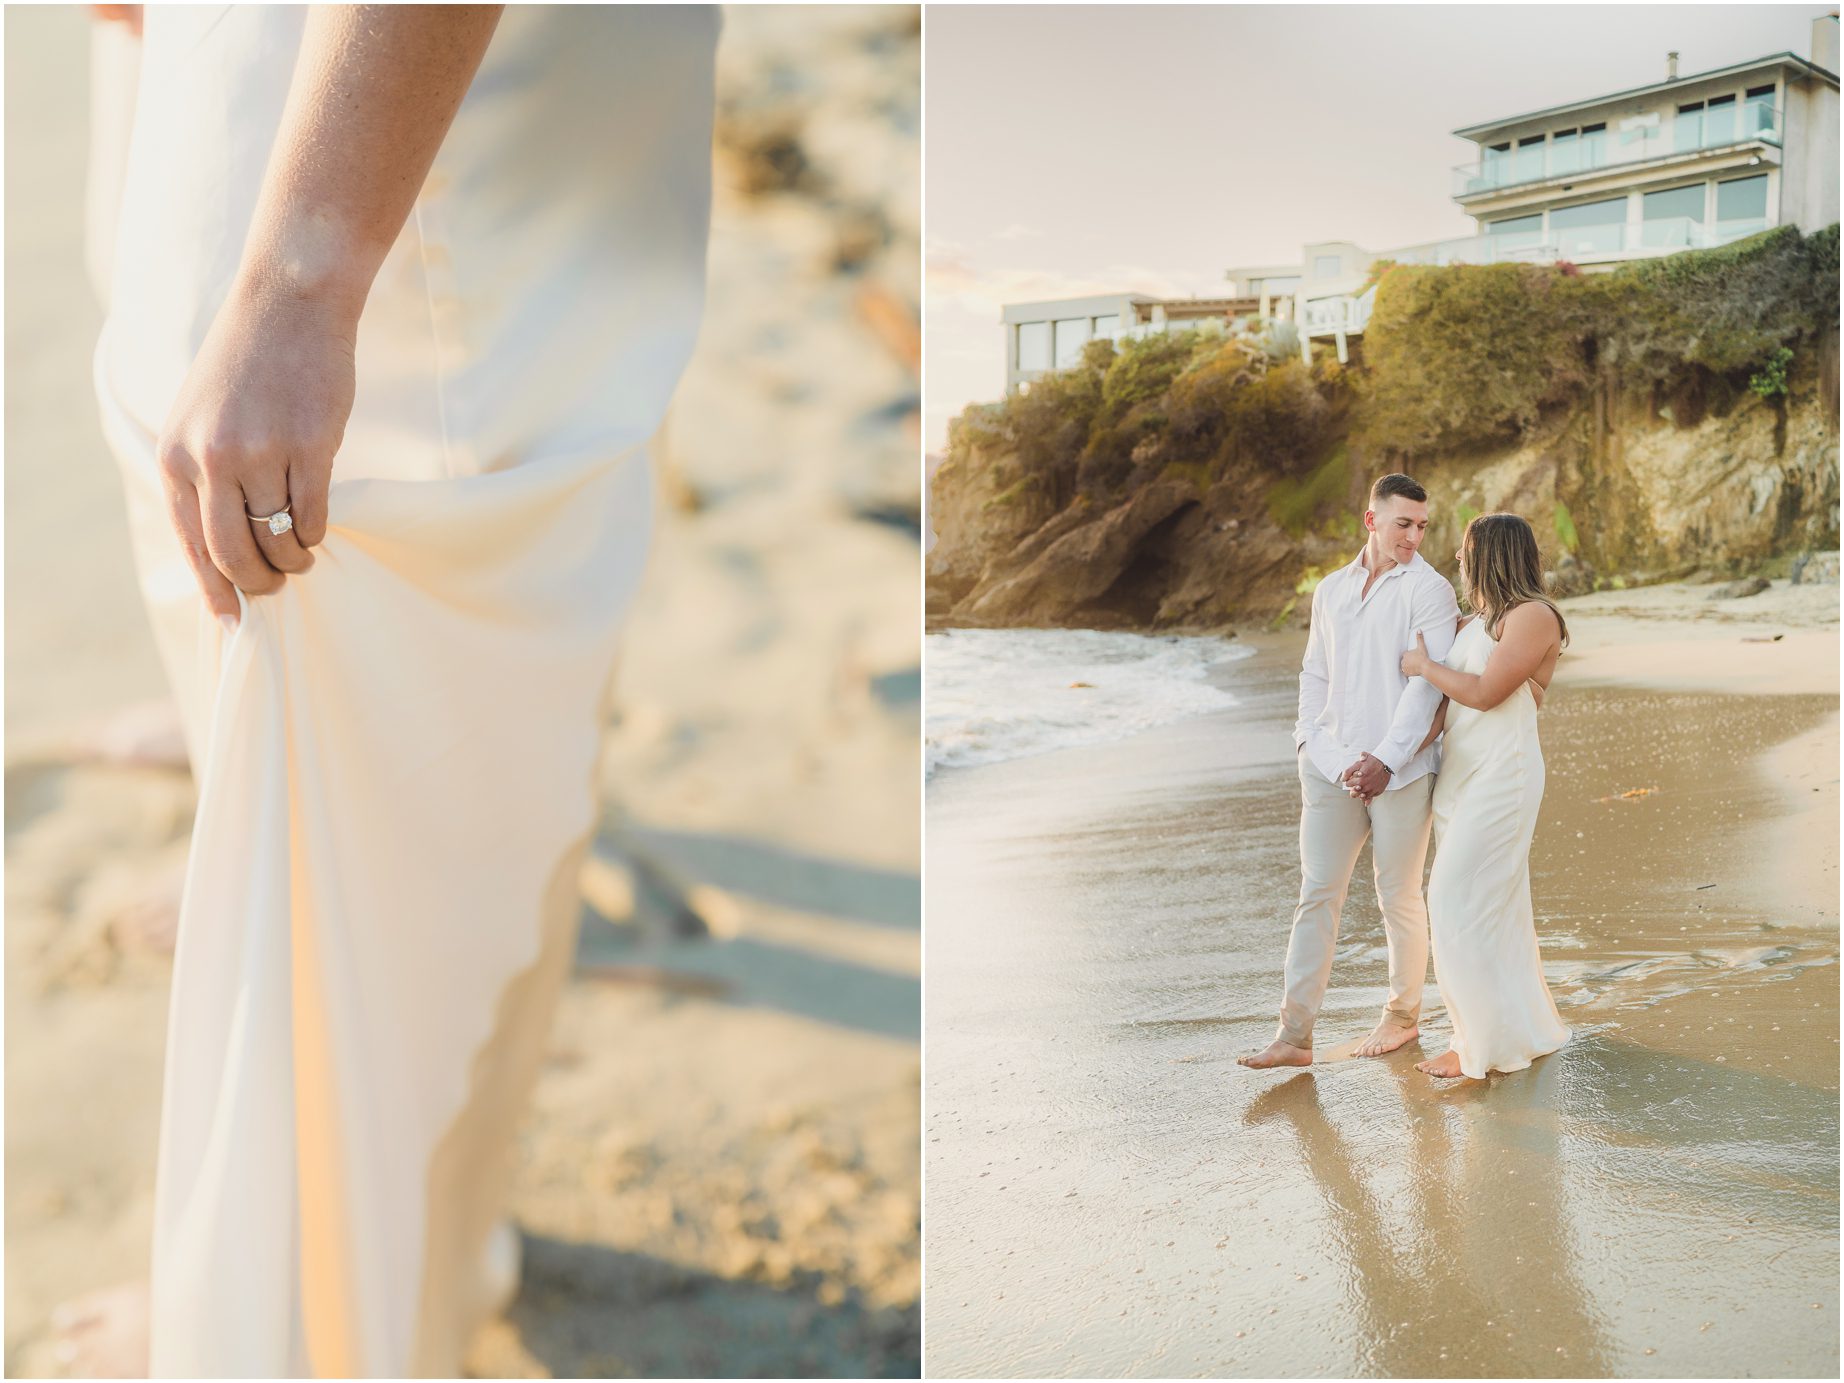 An engagement ring on a woman's finger and a photo of her with her fiancé in Laguna Beach